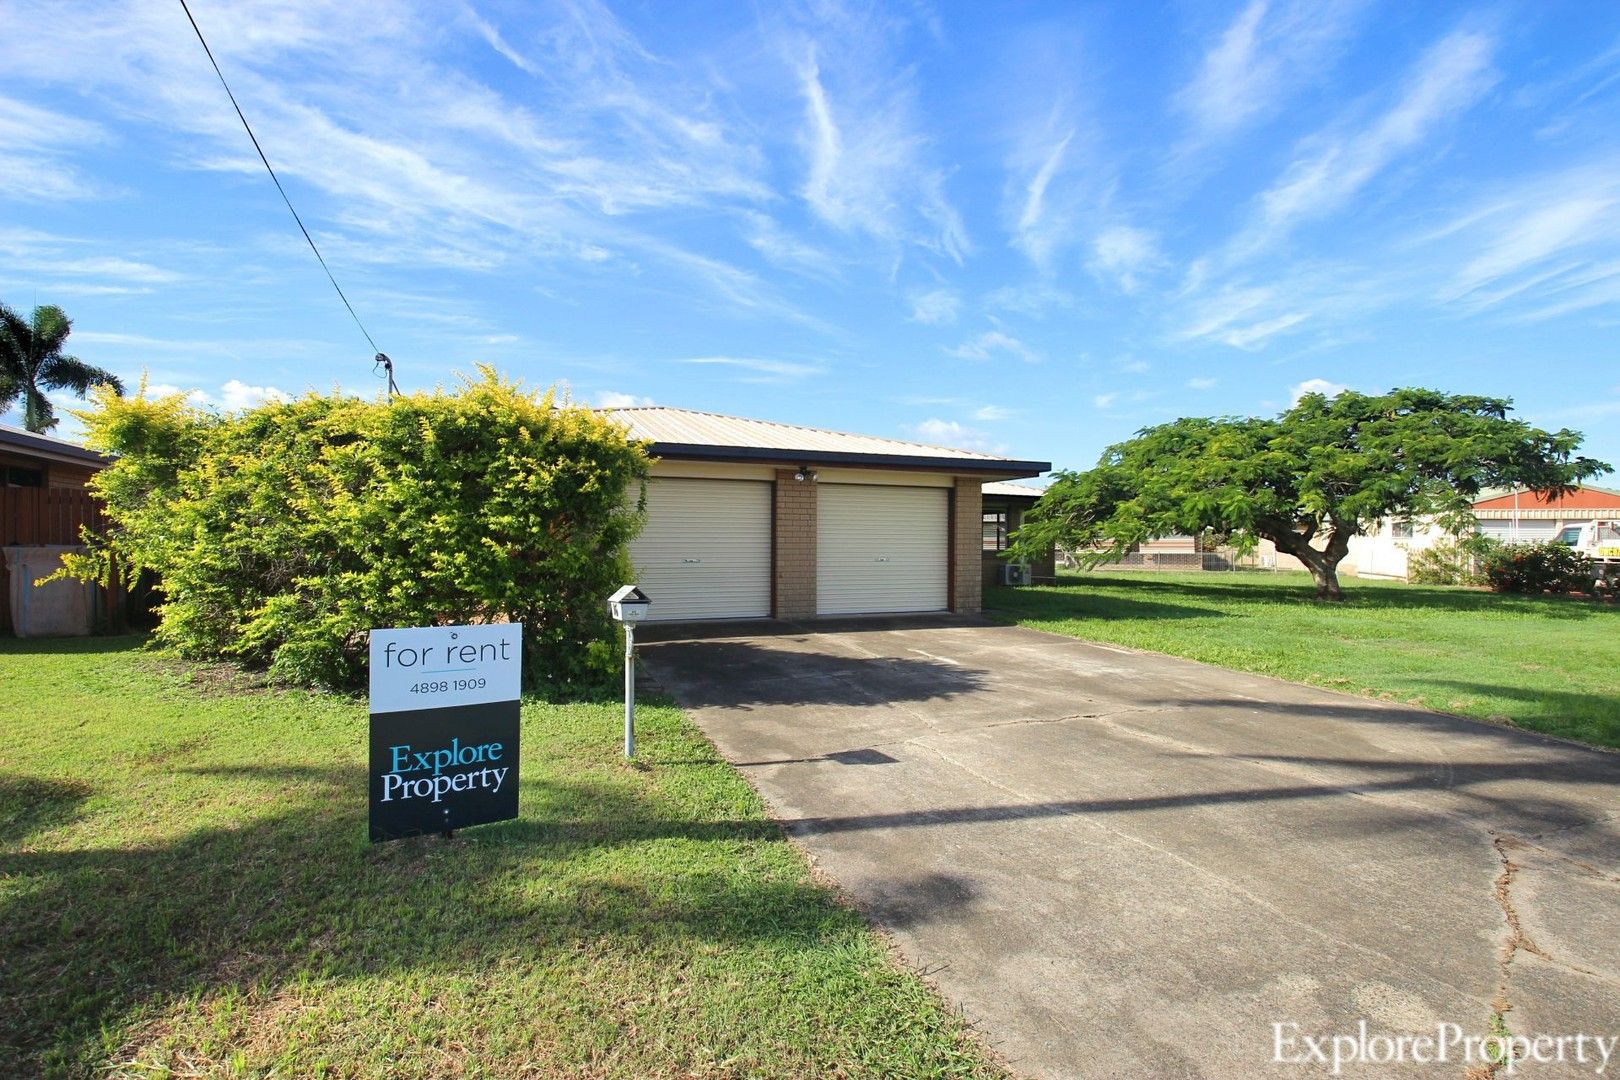 3 bedrooms House in 16 Nella Drive SOUTH MACKAY QLD, 4740